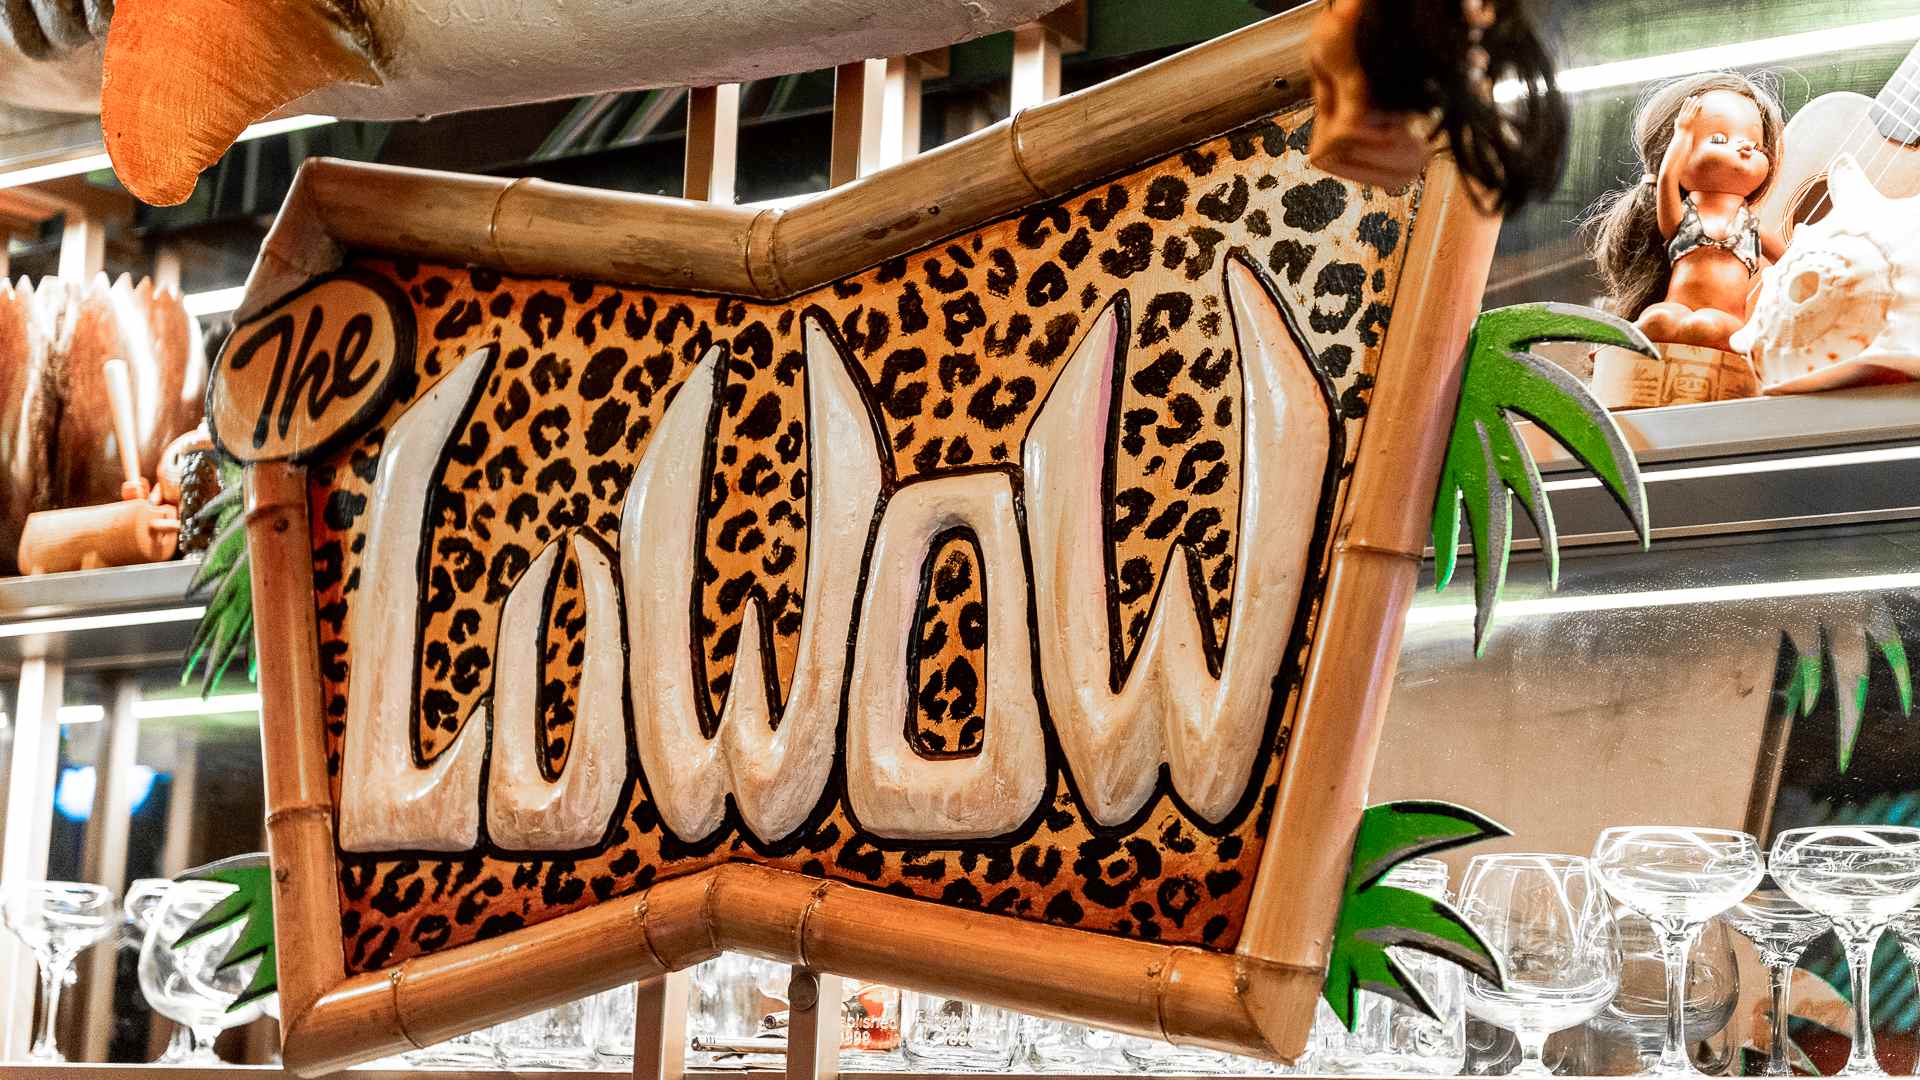 The Luwow Has Opened a Tiki Bar in the CBD with Leopard Print, Flaming Cocktails and Tacos